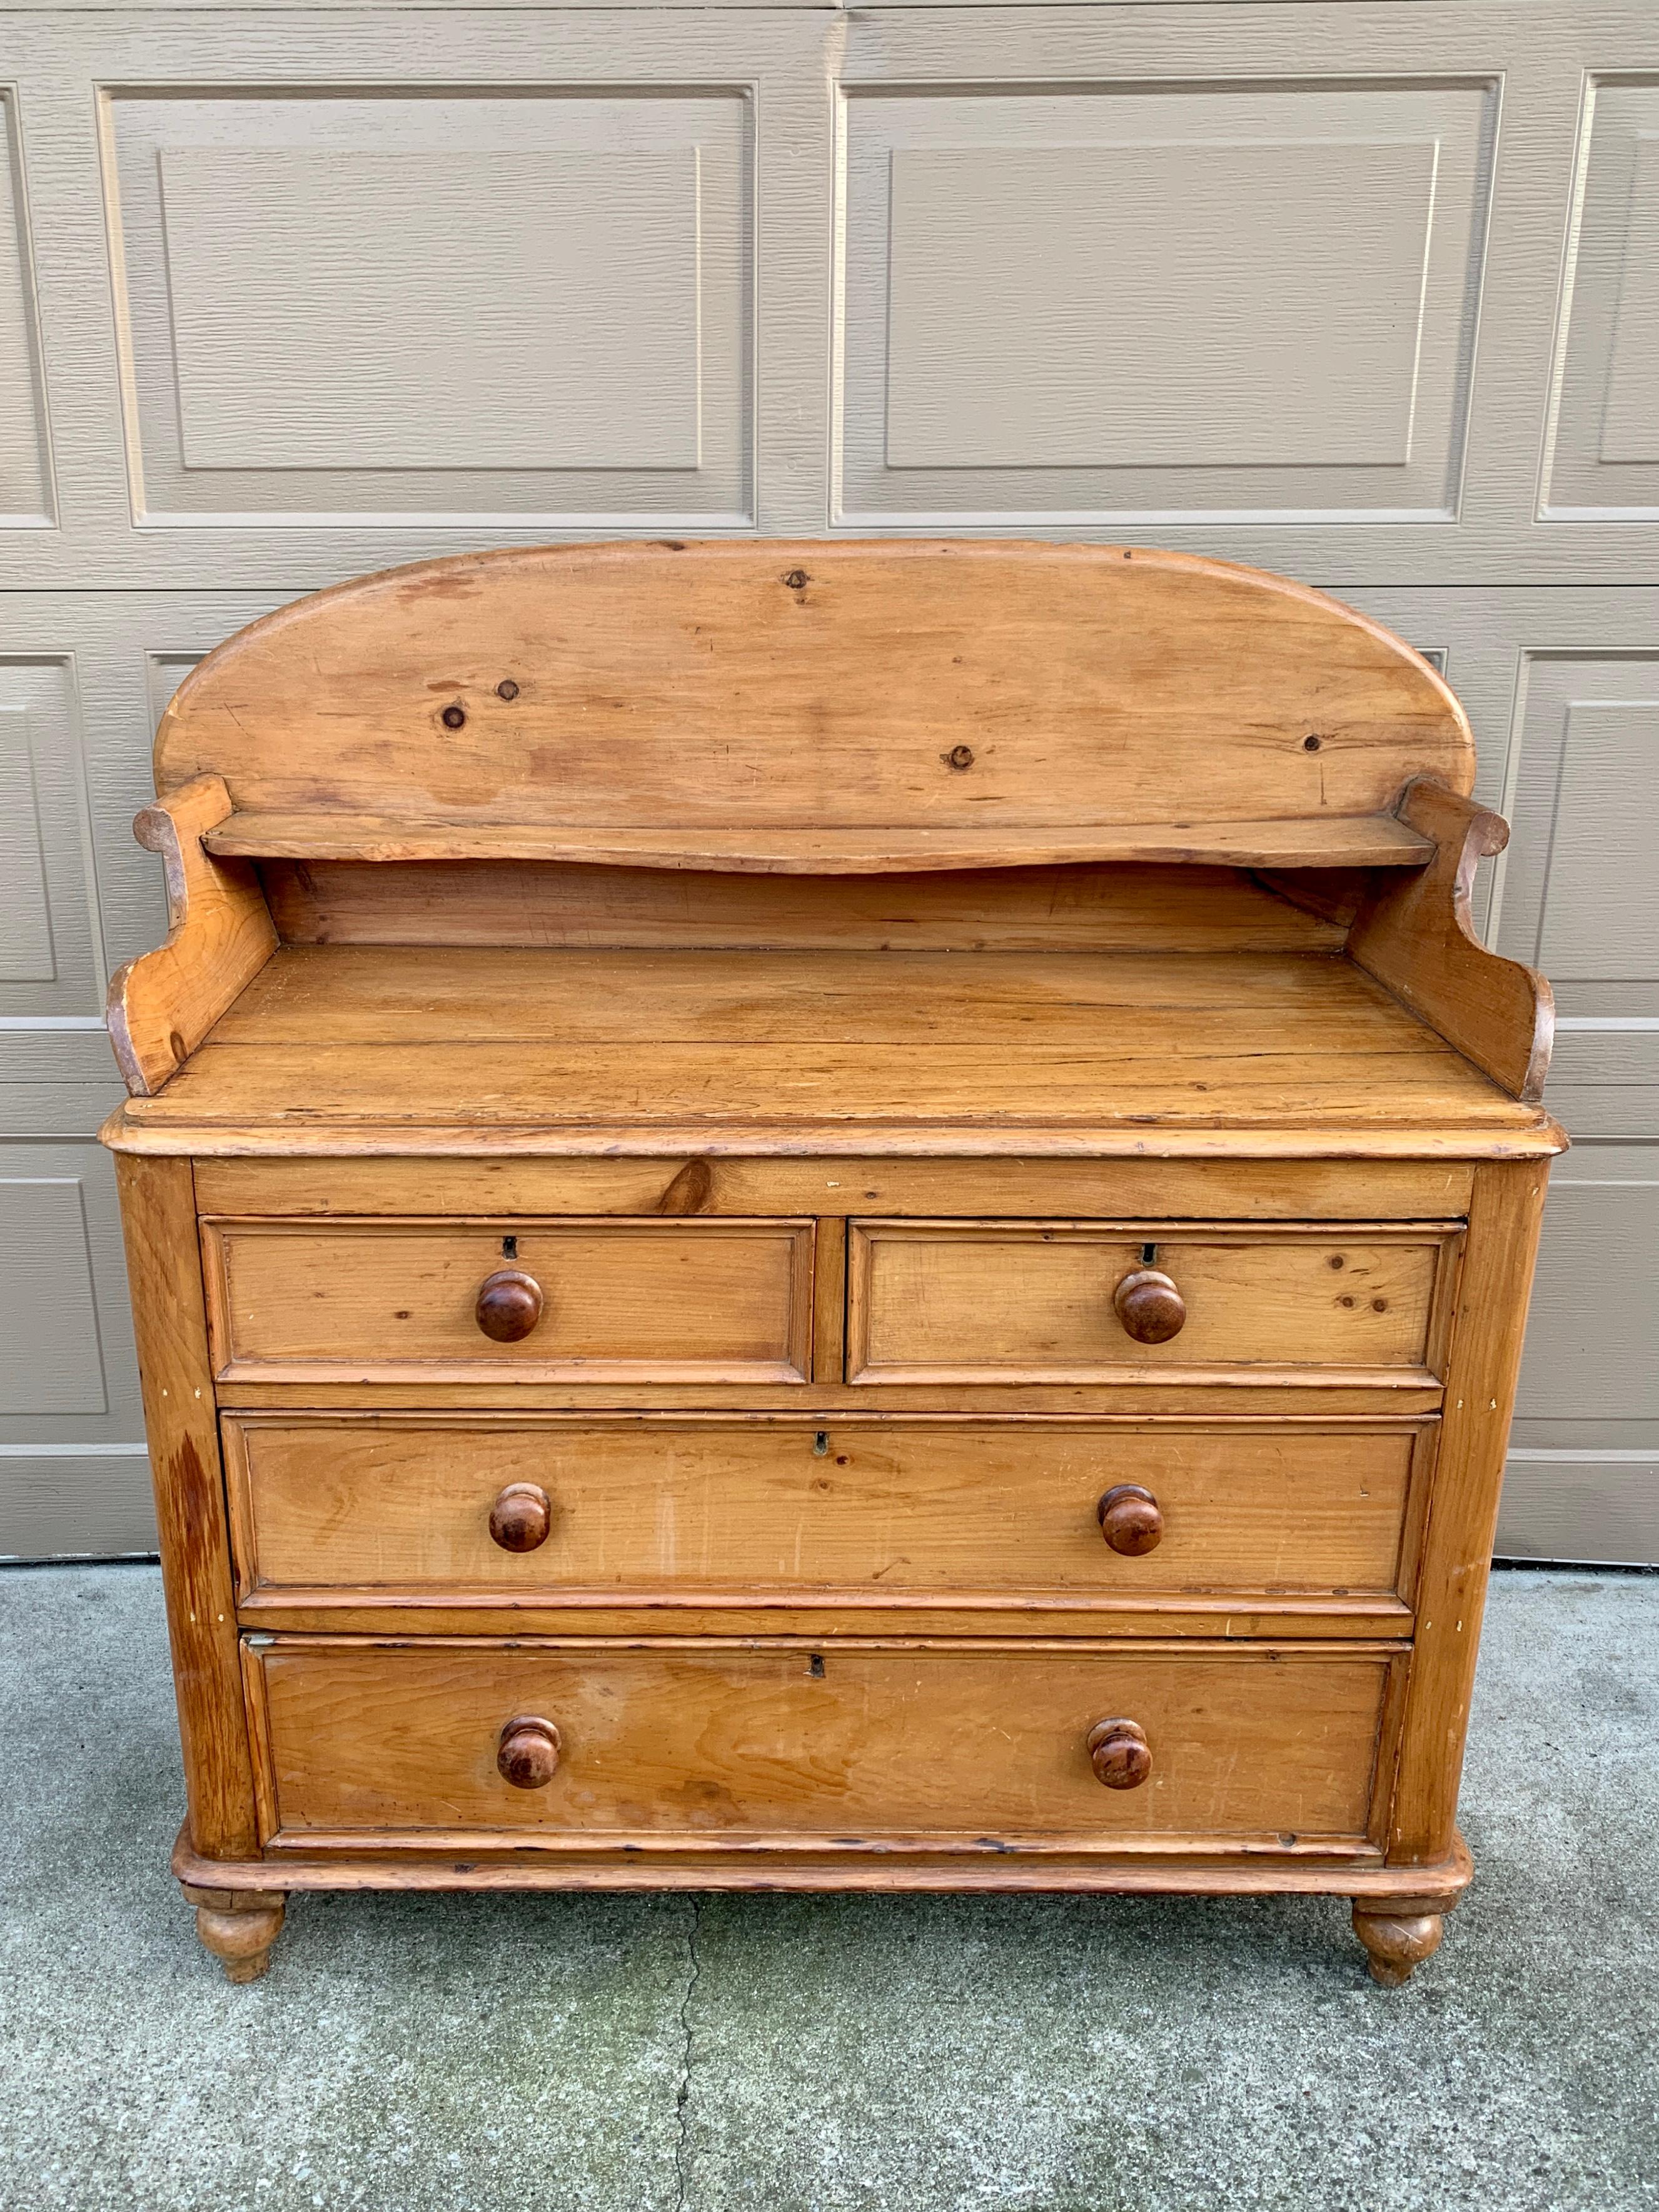 A stunning and unique Scandinavian solid pine four-drawer dresser, chest of drawers, or server. This beautiful piece is all original, including the knobs and curved back.. It would be right at home in a traditional space or a modern room. With